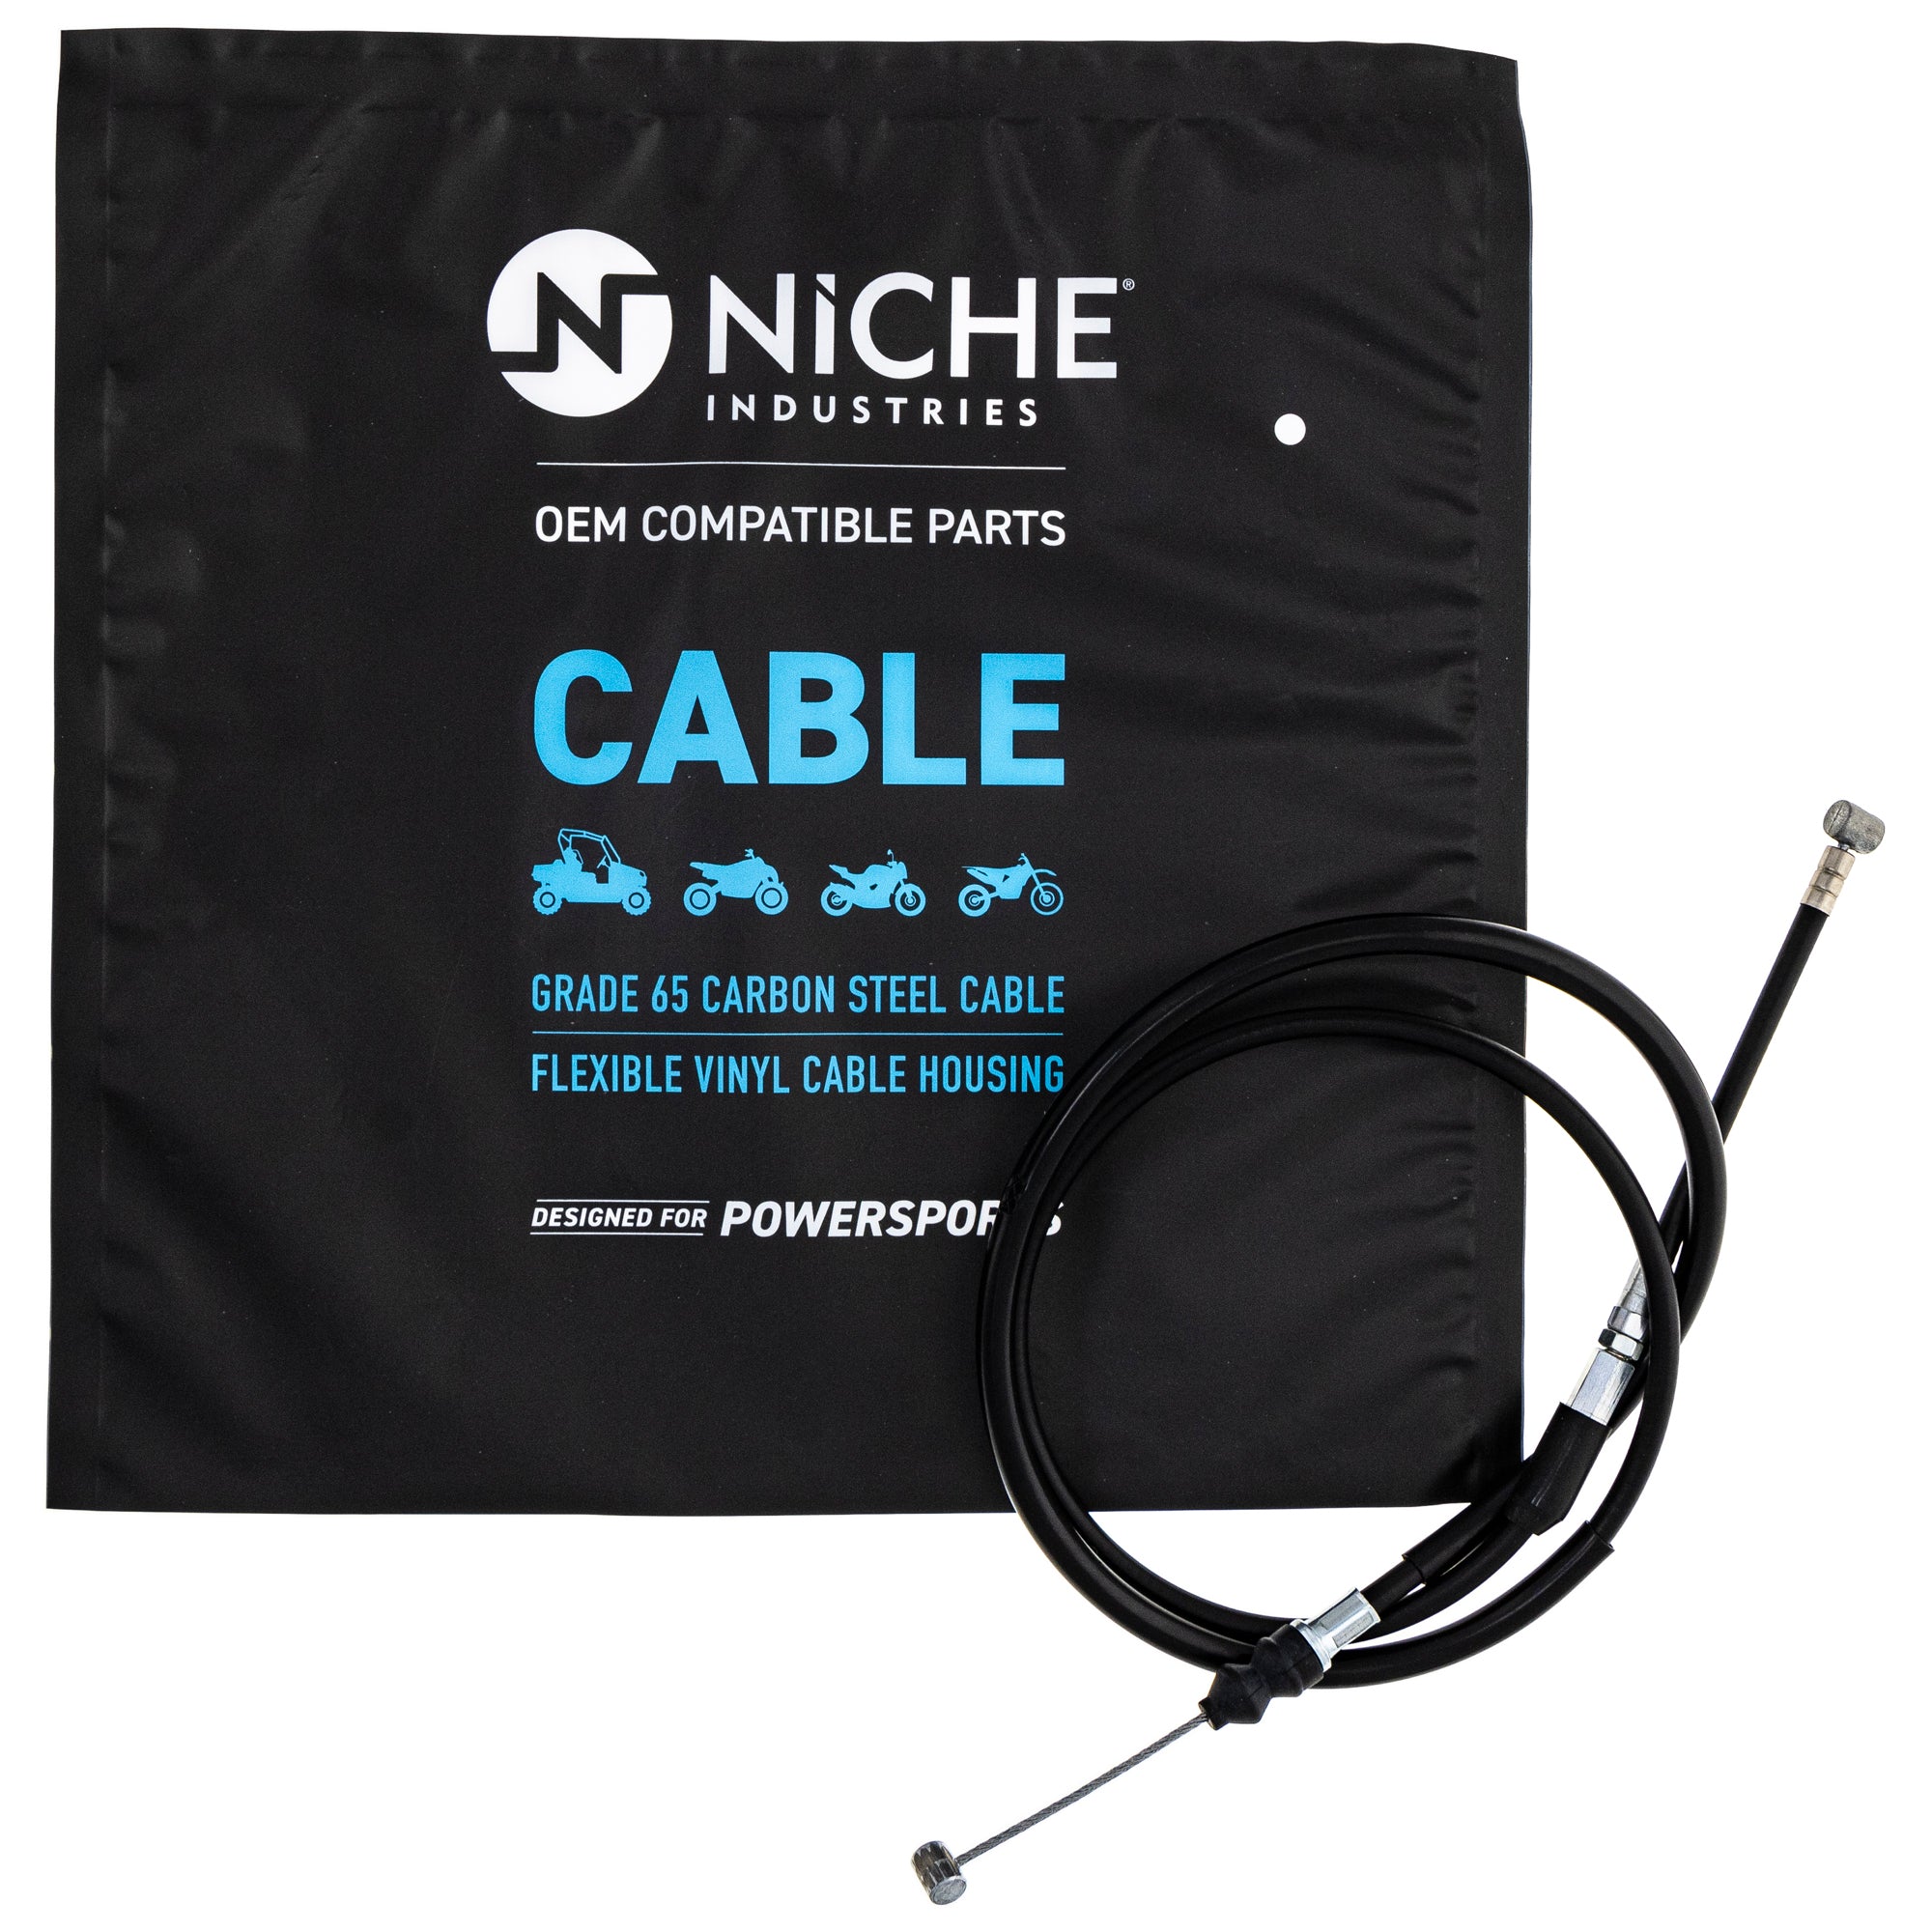 NICHE 519-CCB2208L Clutch Cable for zOTHER RMX250 RM250 RM125